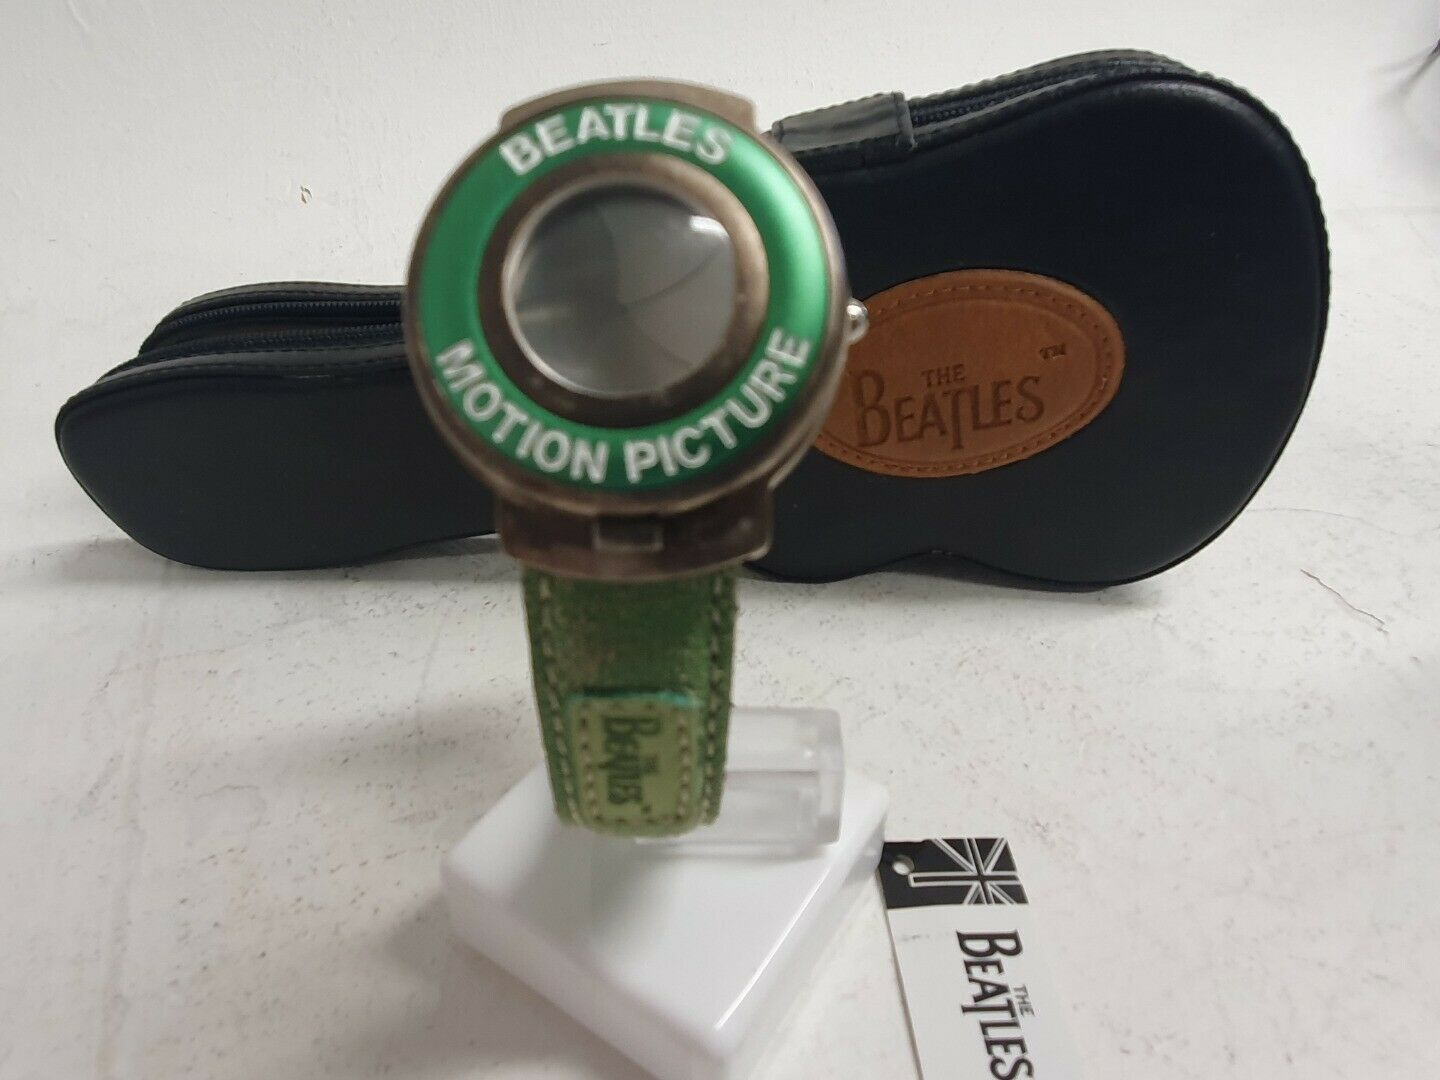 Apple Corps 'Beatles Motion Picture' watch. An Apple Corps, Beatles Motion Picture B51 Special - Image 4 of 7